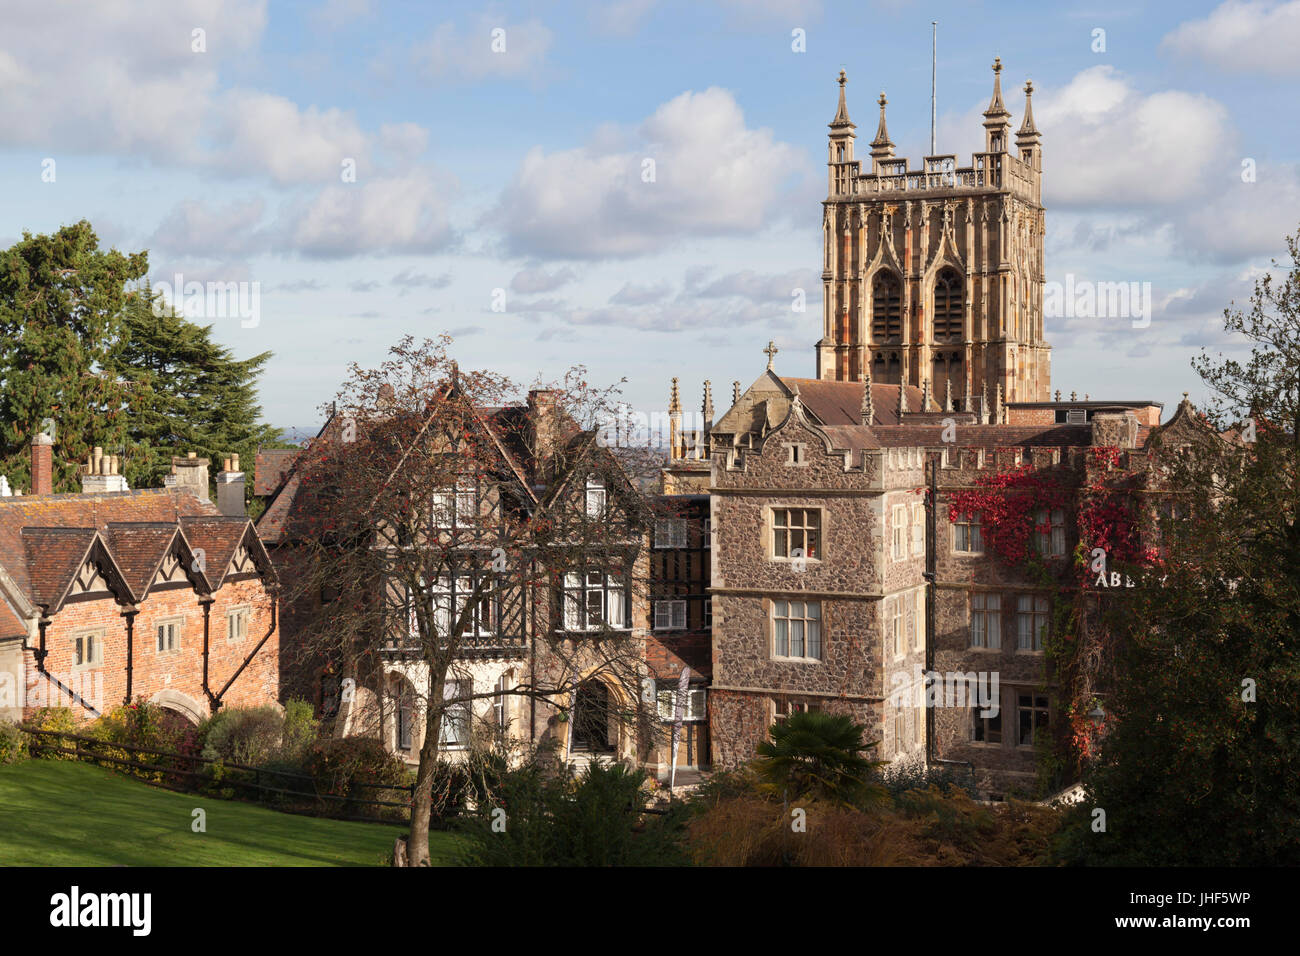 Great Malvern Priory and the Abbey Hotel, Great Malvern, Worcestershire, England, United Kingdom, Europe Stock Photo